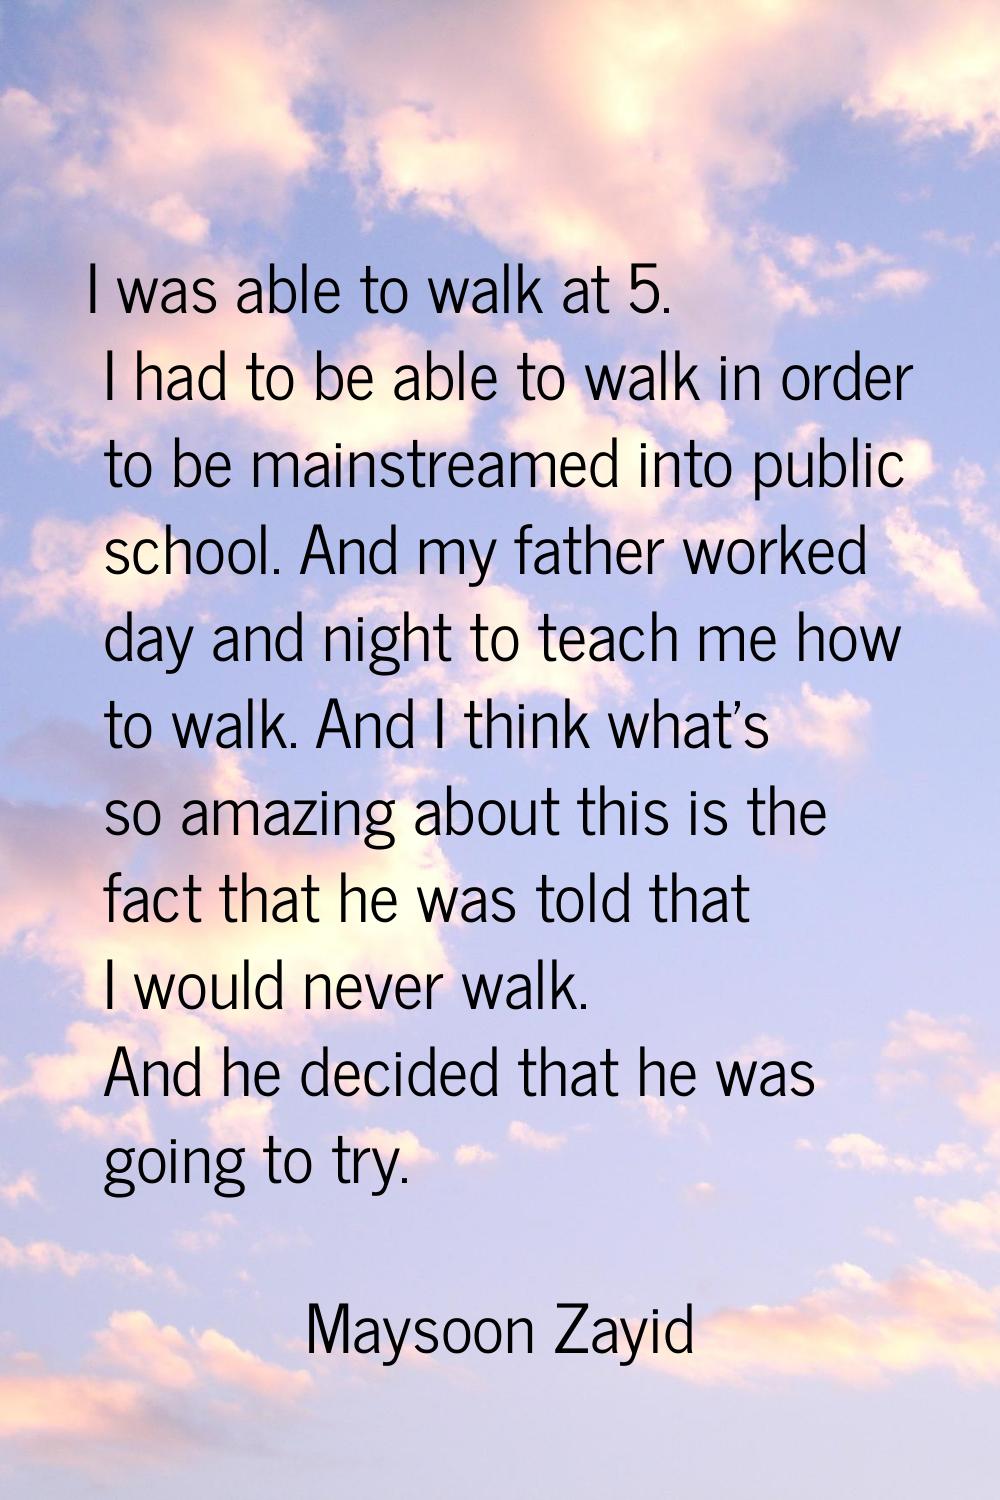 I was able to walk at 5. I had to be able to walk in order to be mainstreamed into public school. A